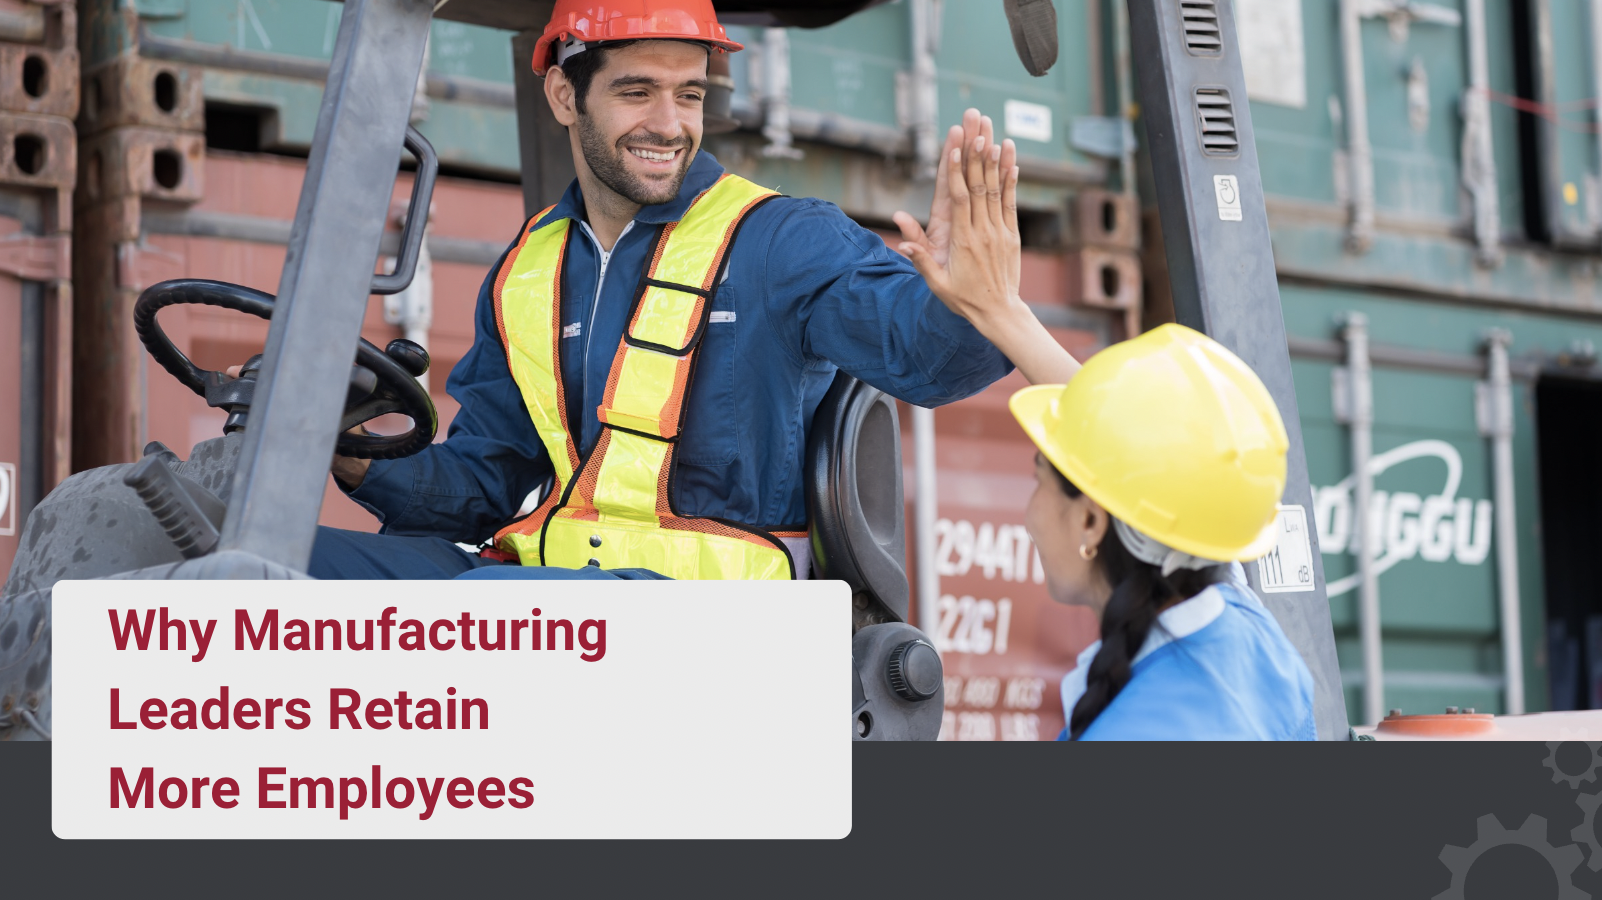 Manufacturing Leaders Help Retain More Employees